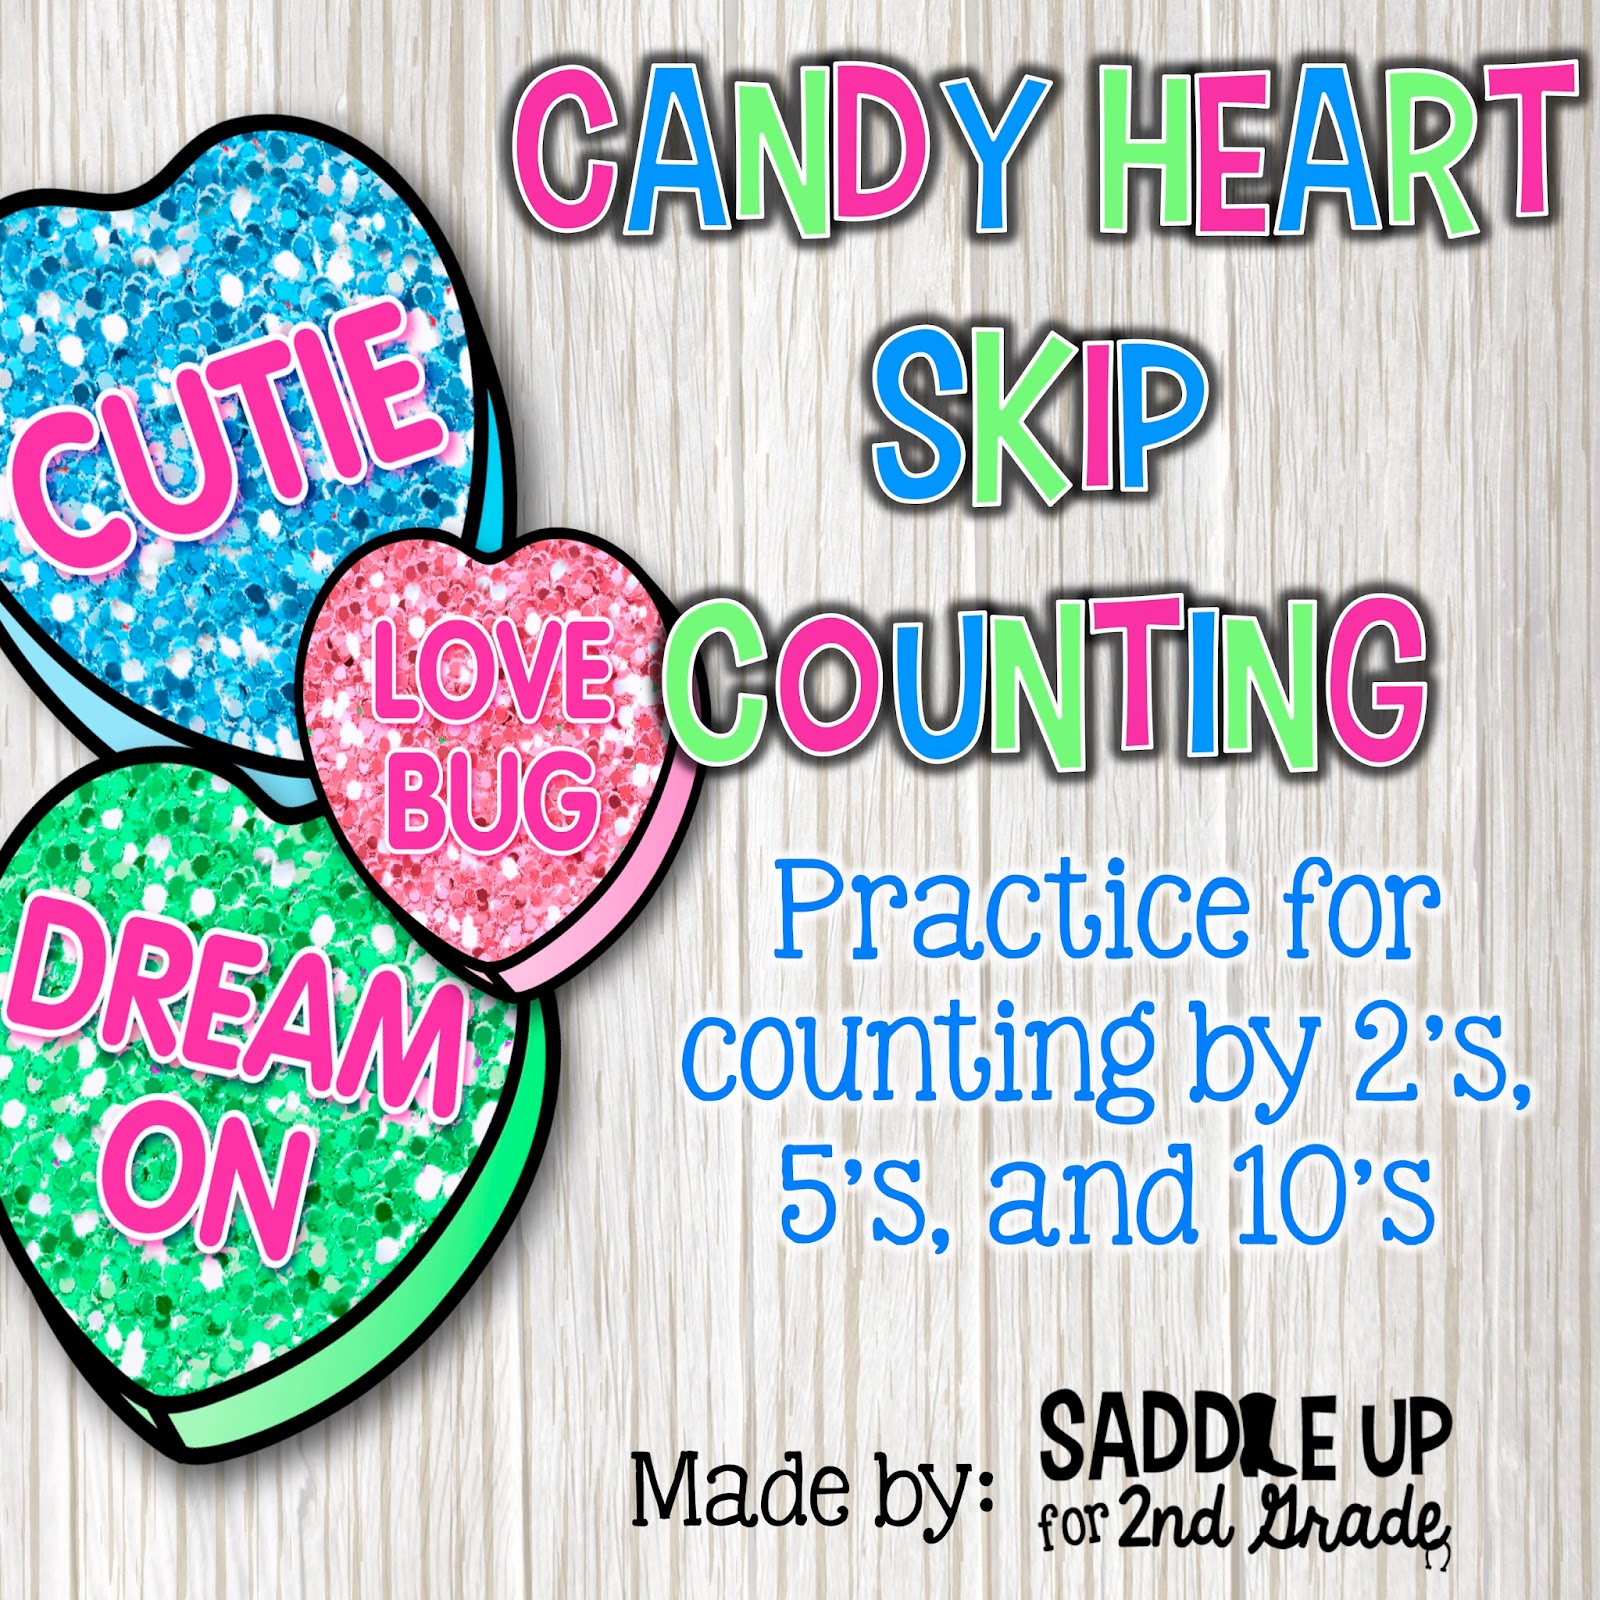 Who doesn't love some Valentine's Day GLITTERY fun?!? These skip counting puzzles are great practice for counting by 2's, 5's, and 10's. This is a fun activity that your class will love! 